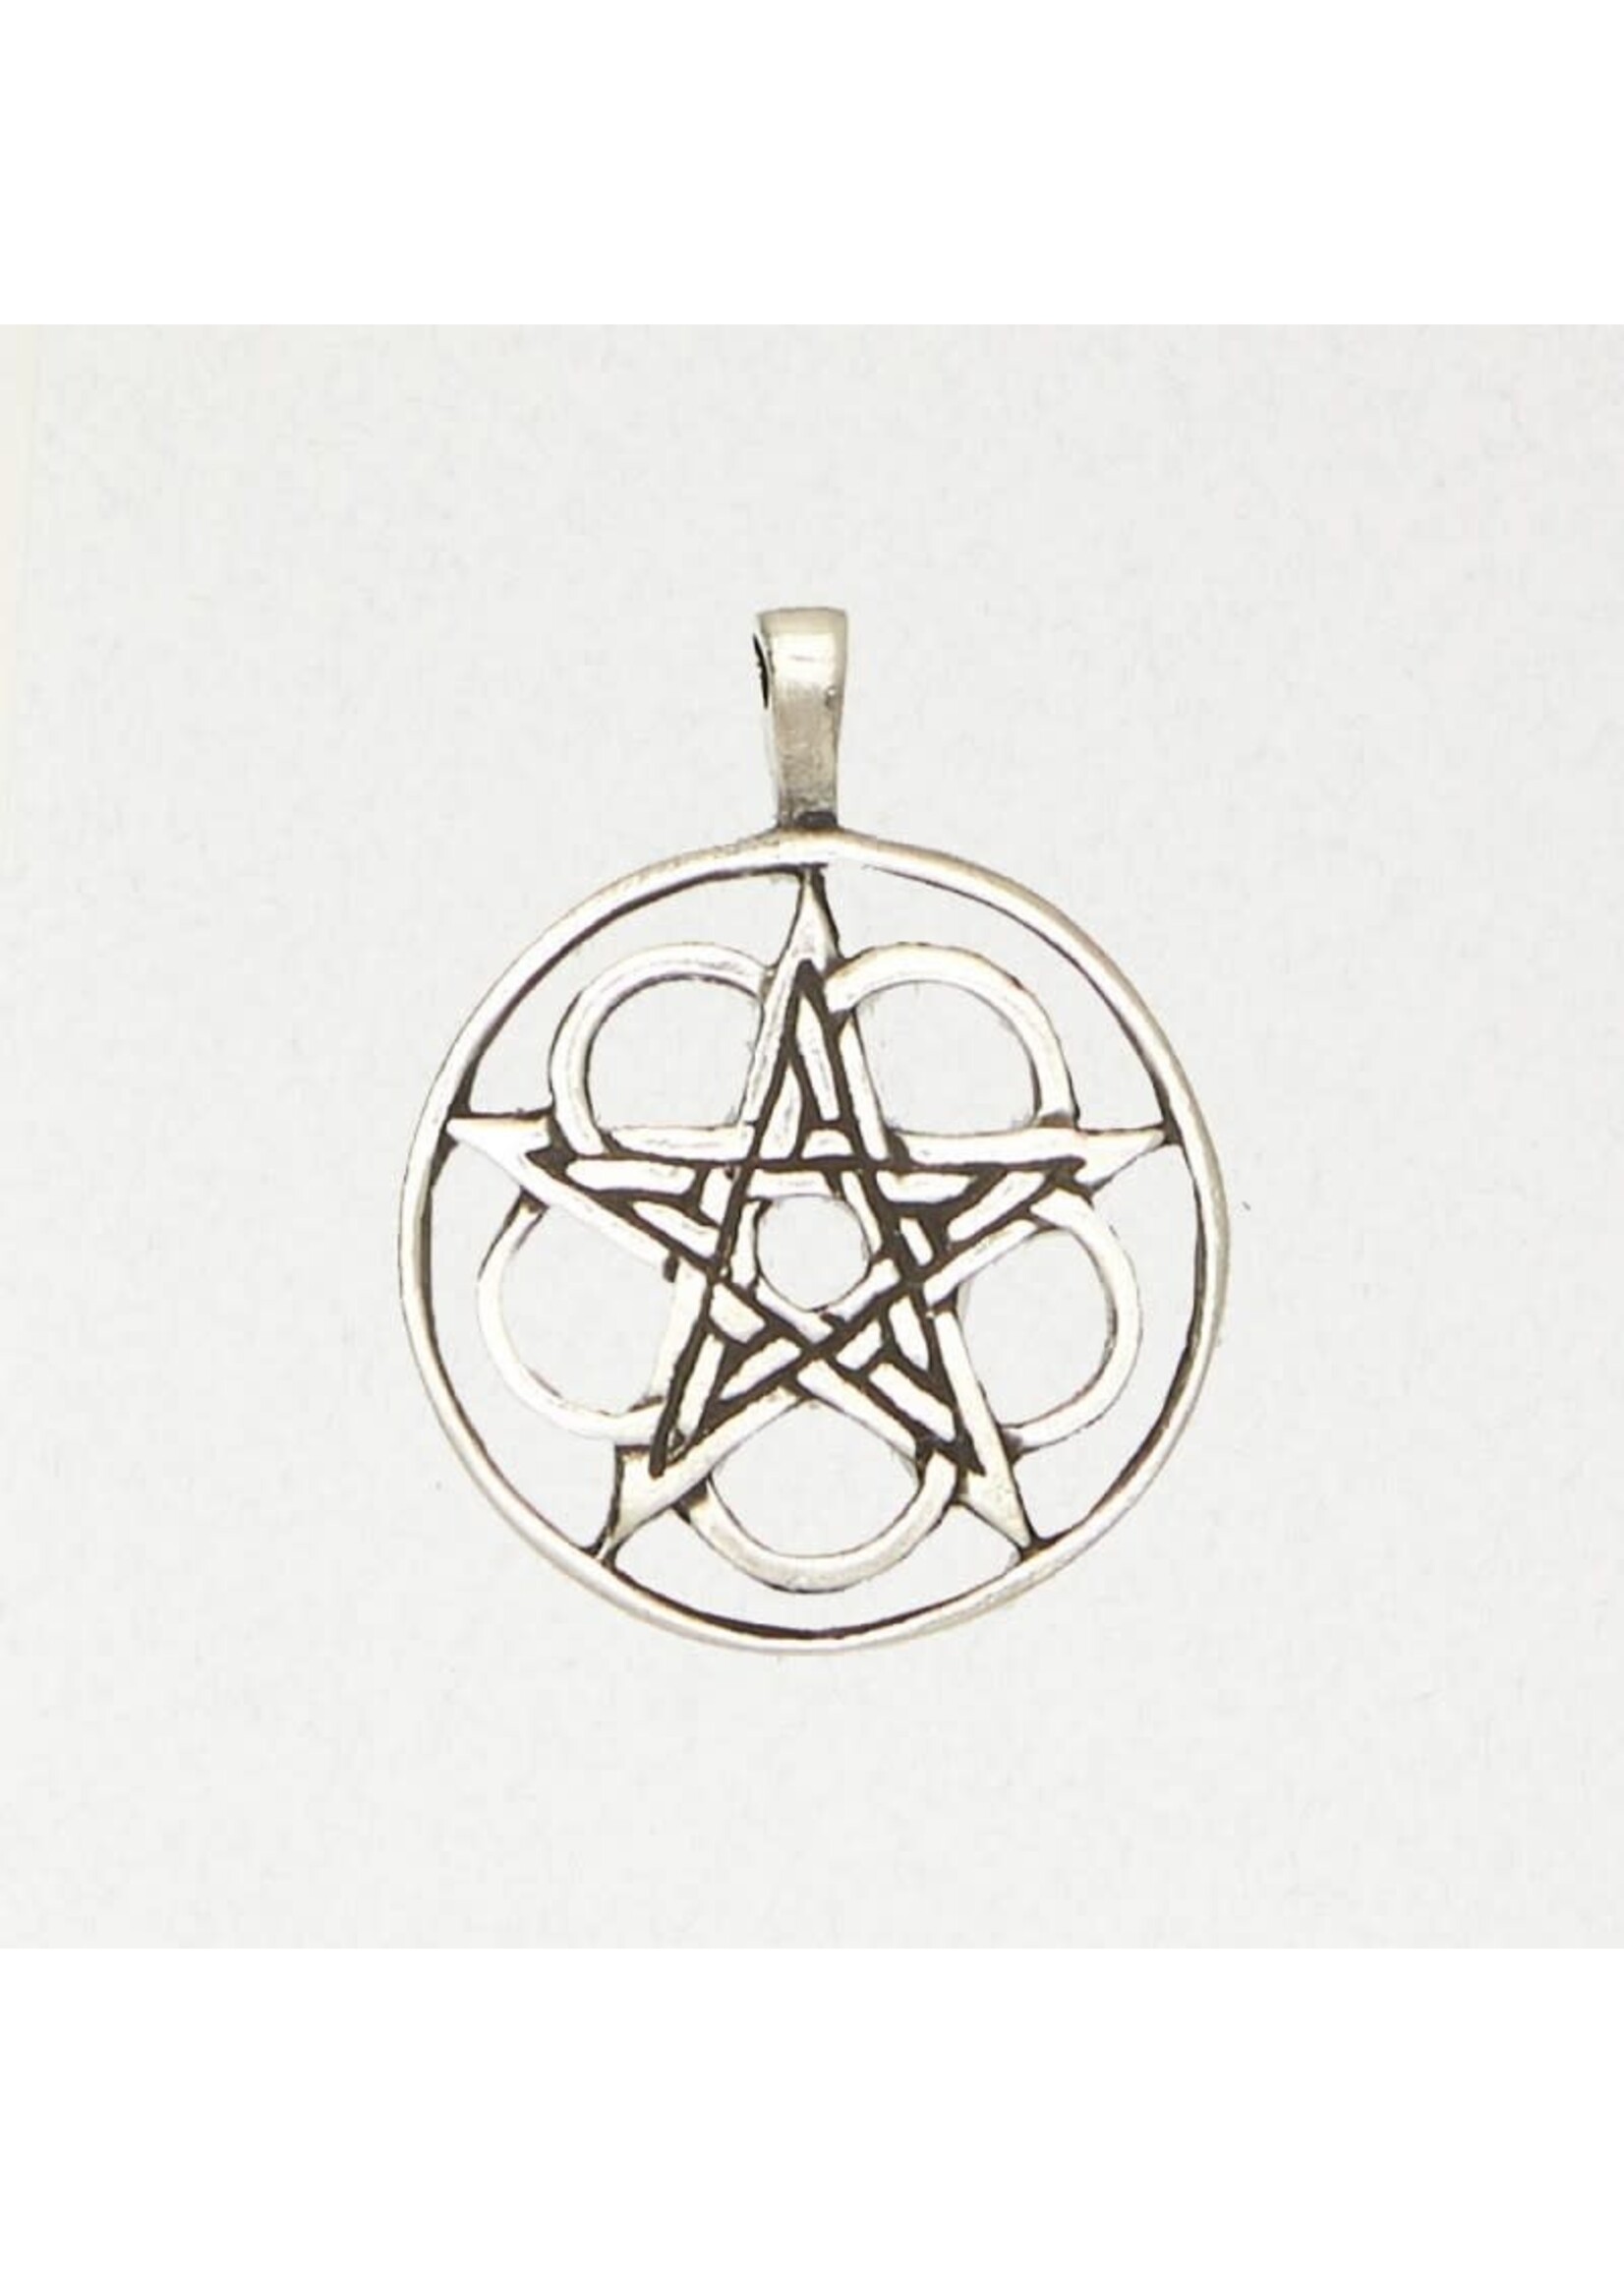 Wicca Pewter Pendant - Pentacle Rose